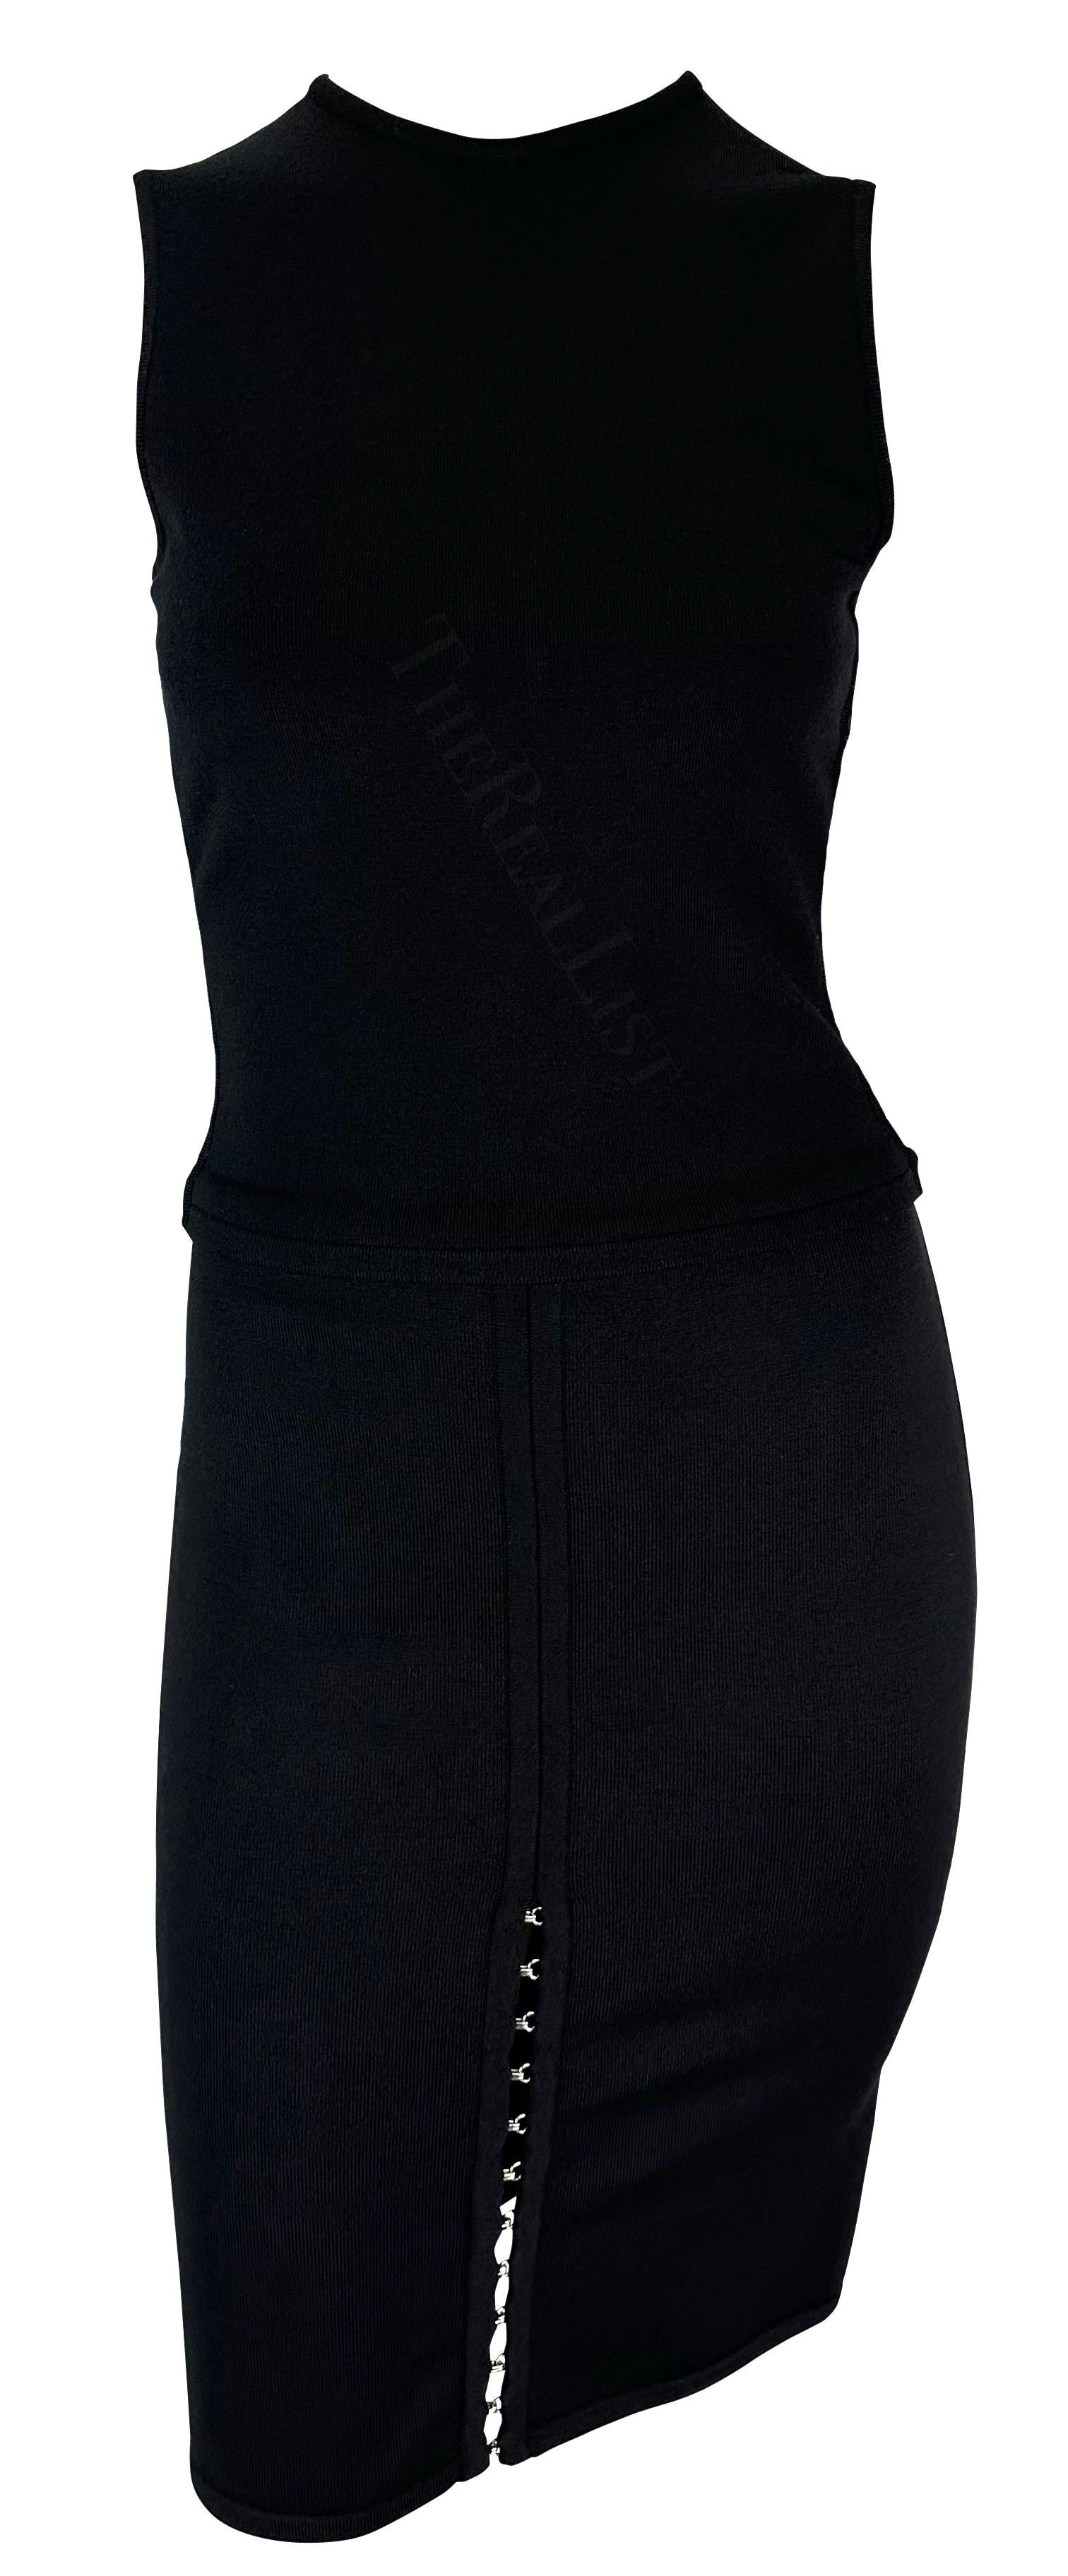 S/S 2002 Gianni Versace by Donatella Black Knit Tank Top Skirt Set  For Sale 2